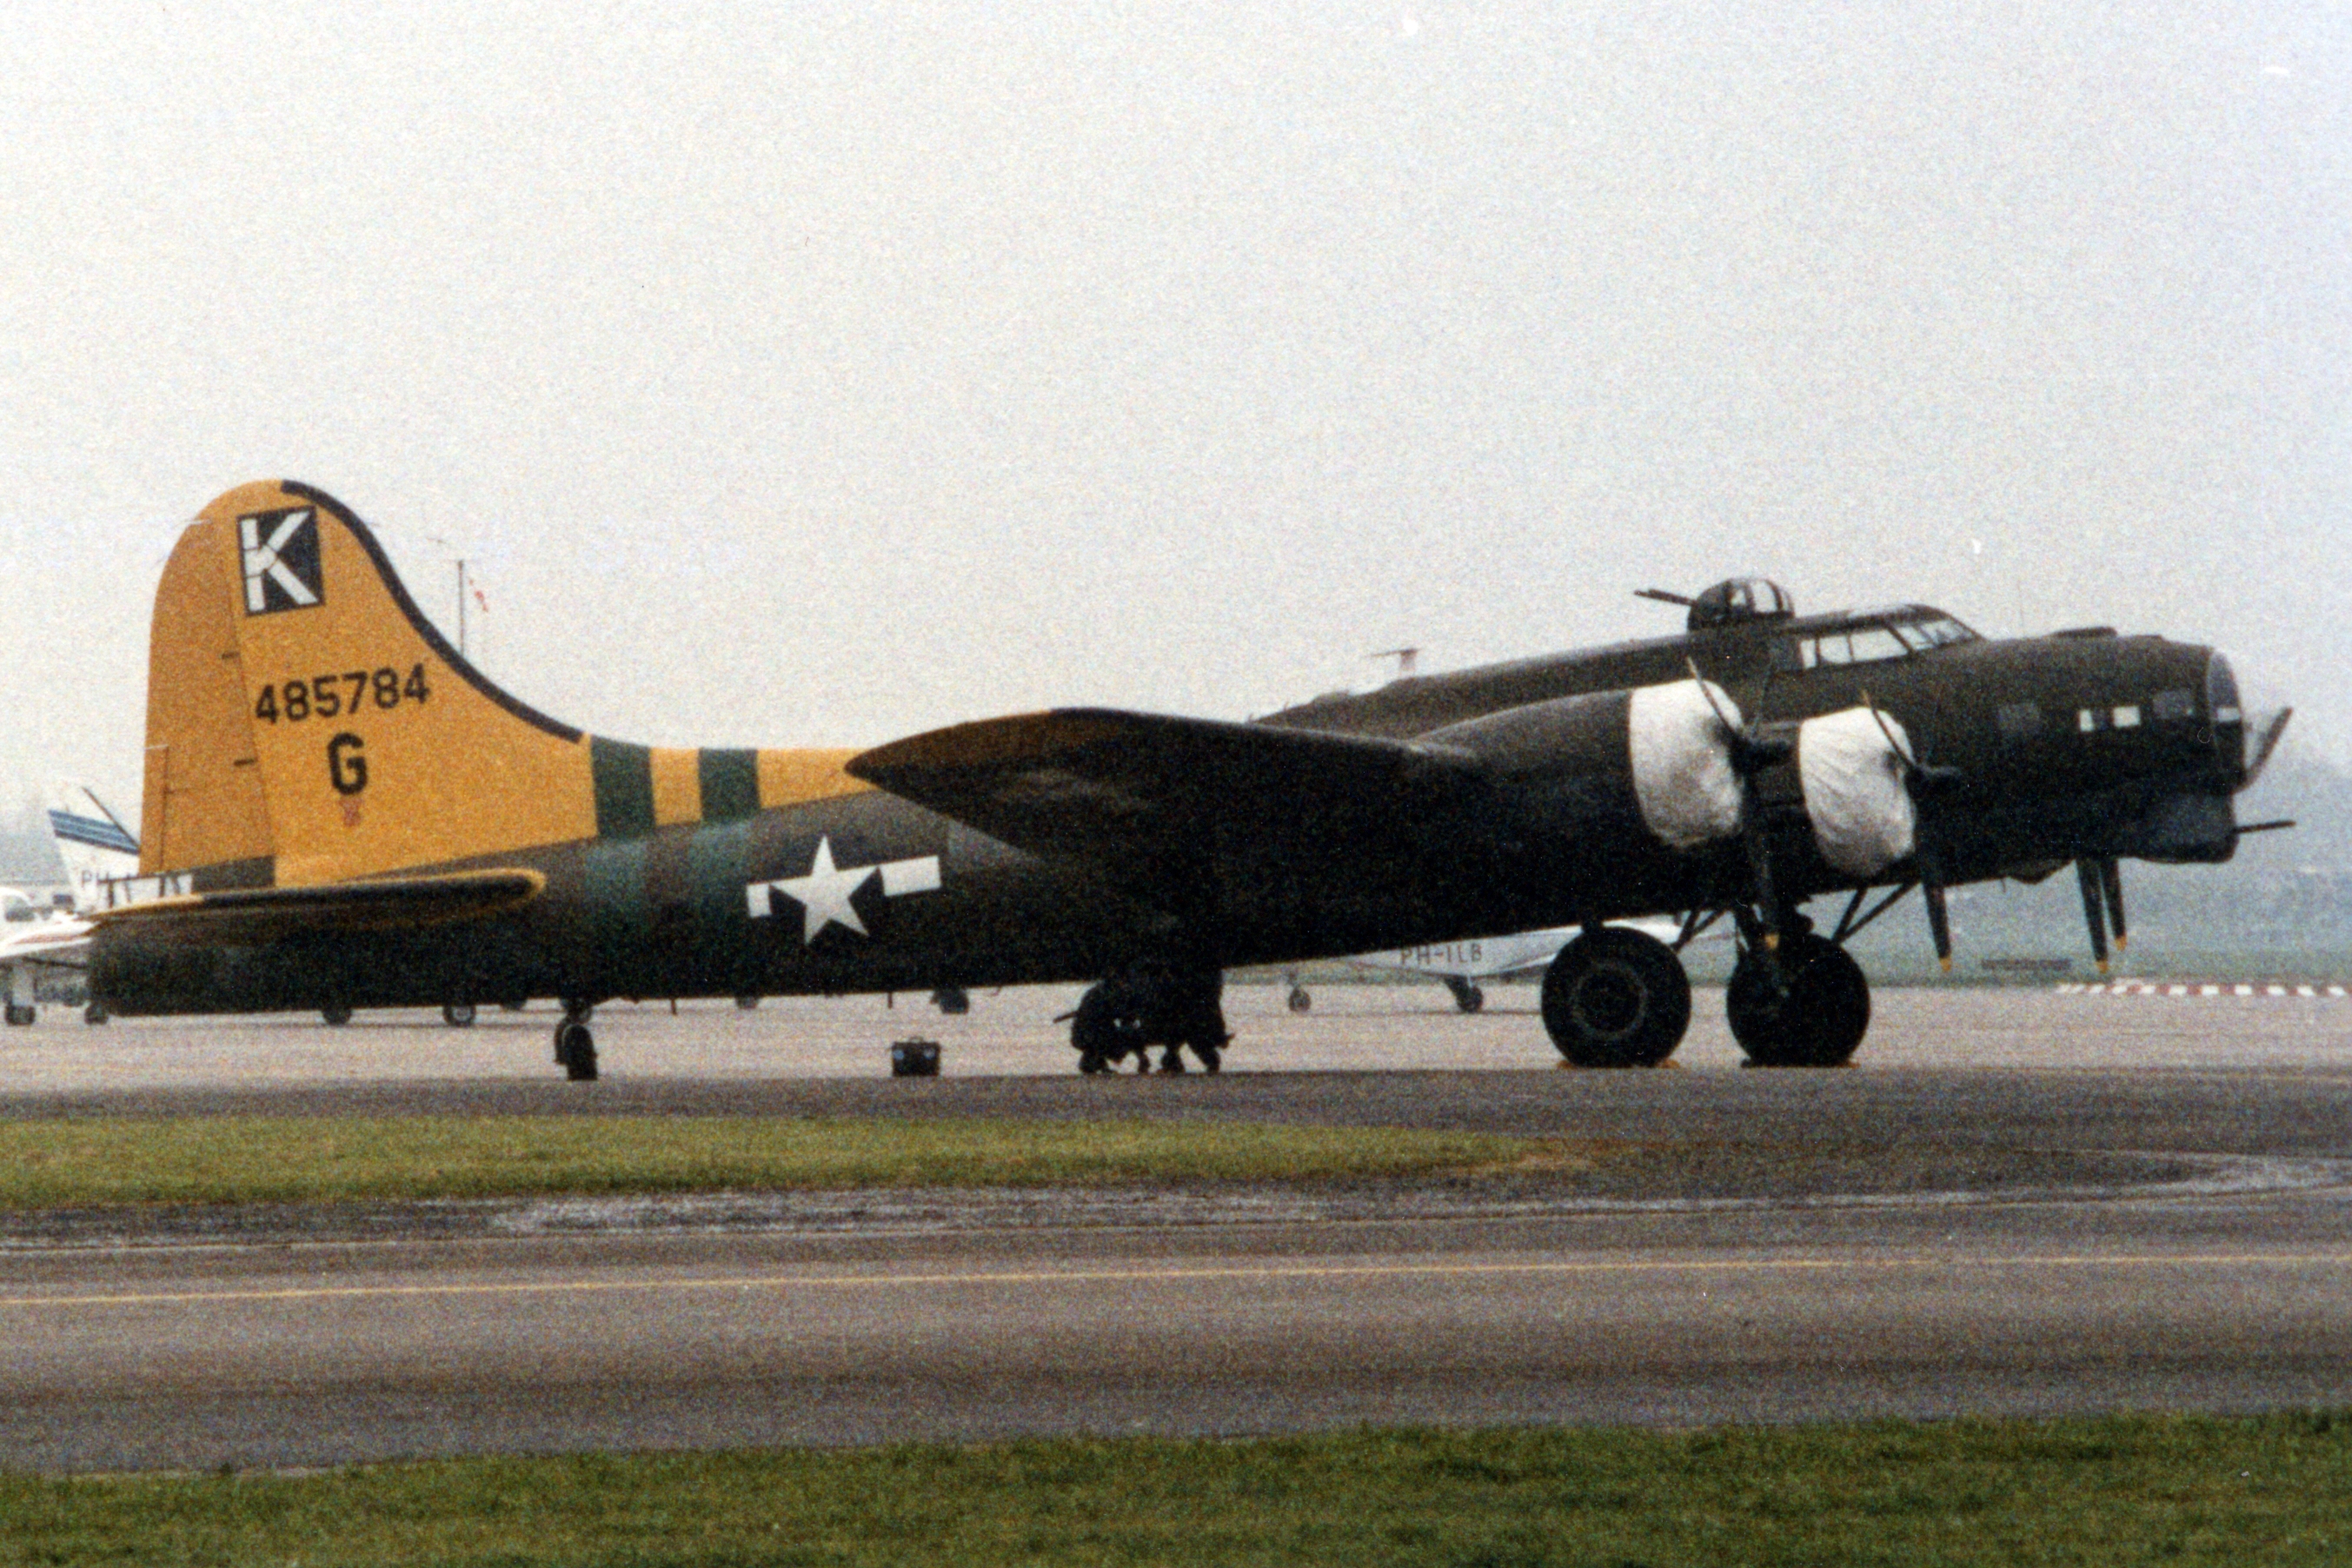 Boeing B-17 Flying Fortress #2